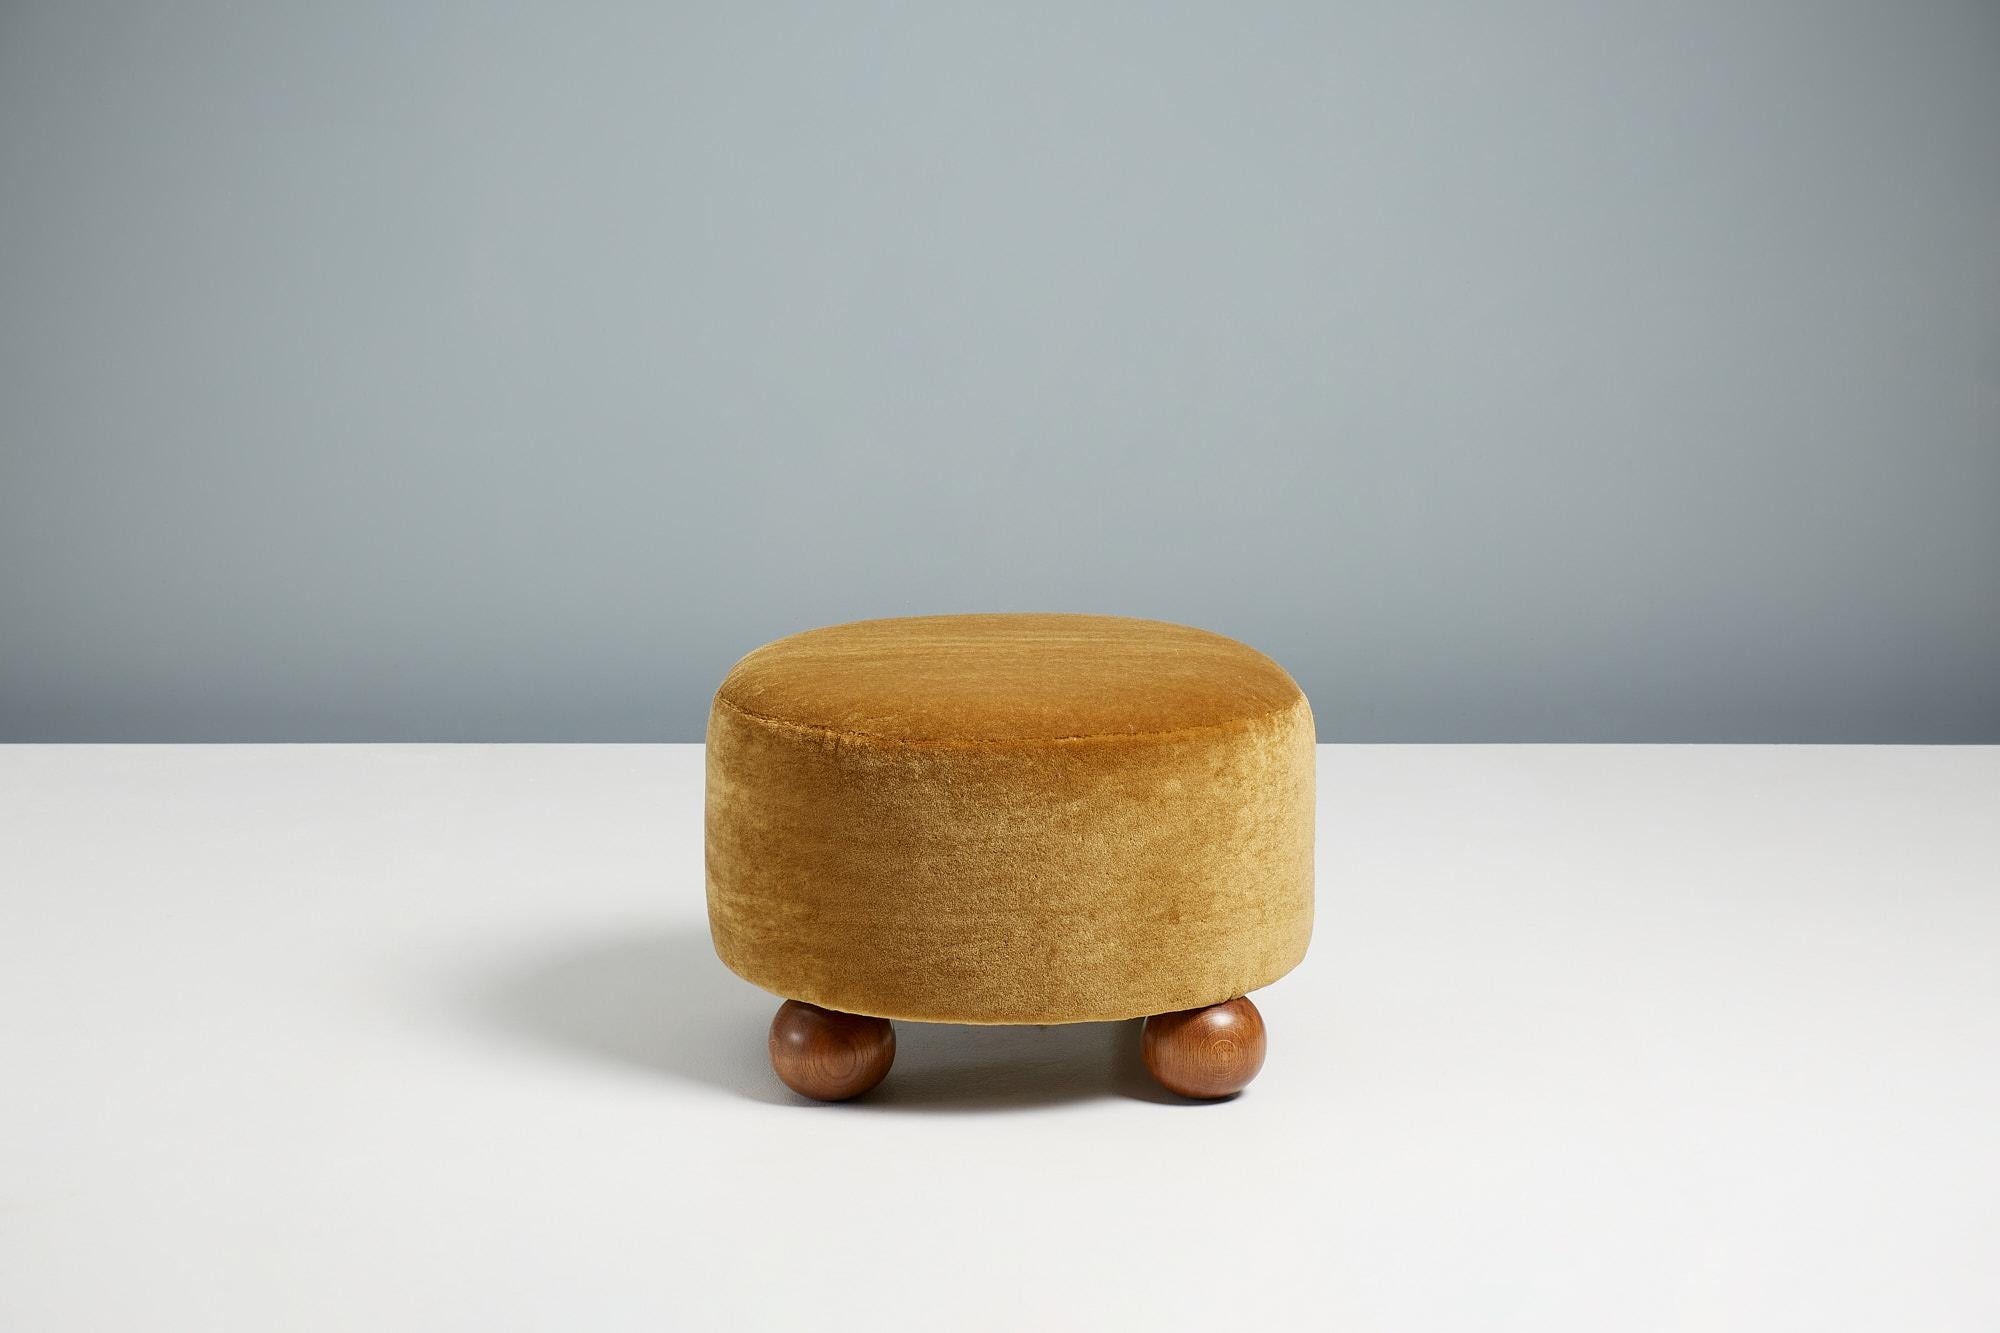 Dagmar Design - Round Ottoman

Custom-made ottomans developed & produced at our workshops in London using the highest quality materials. These examples are upholstered in a mustard mohair velvet by Pierre Frey with fumed oak ball feet. This